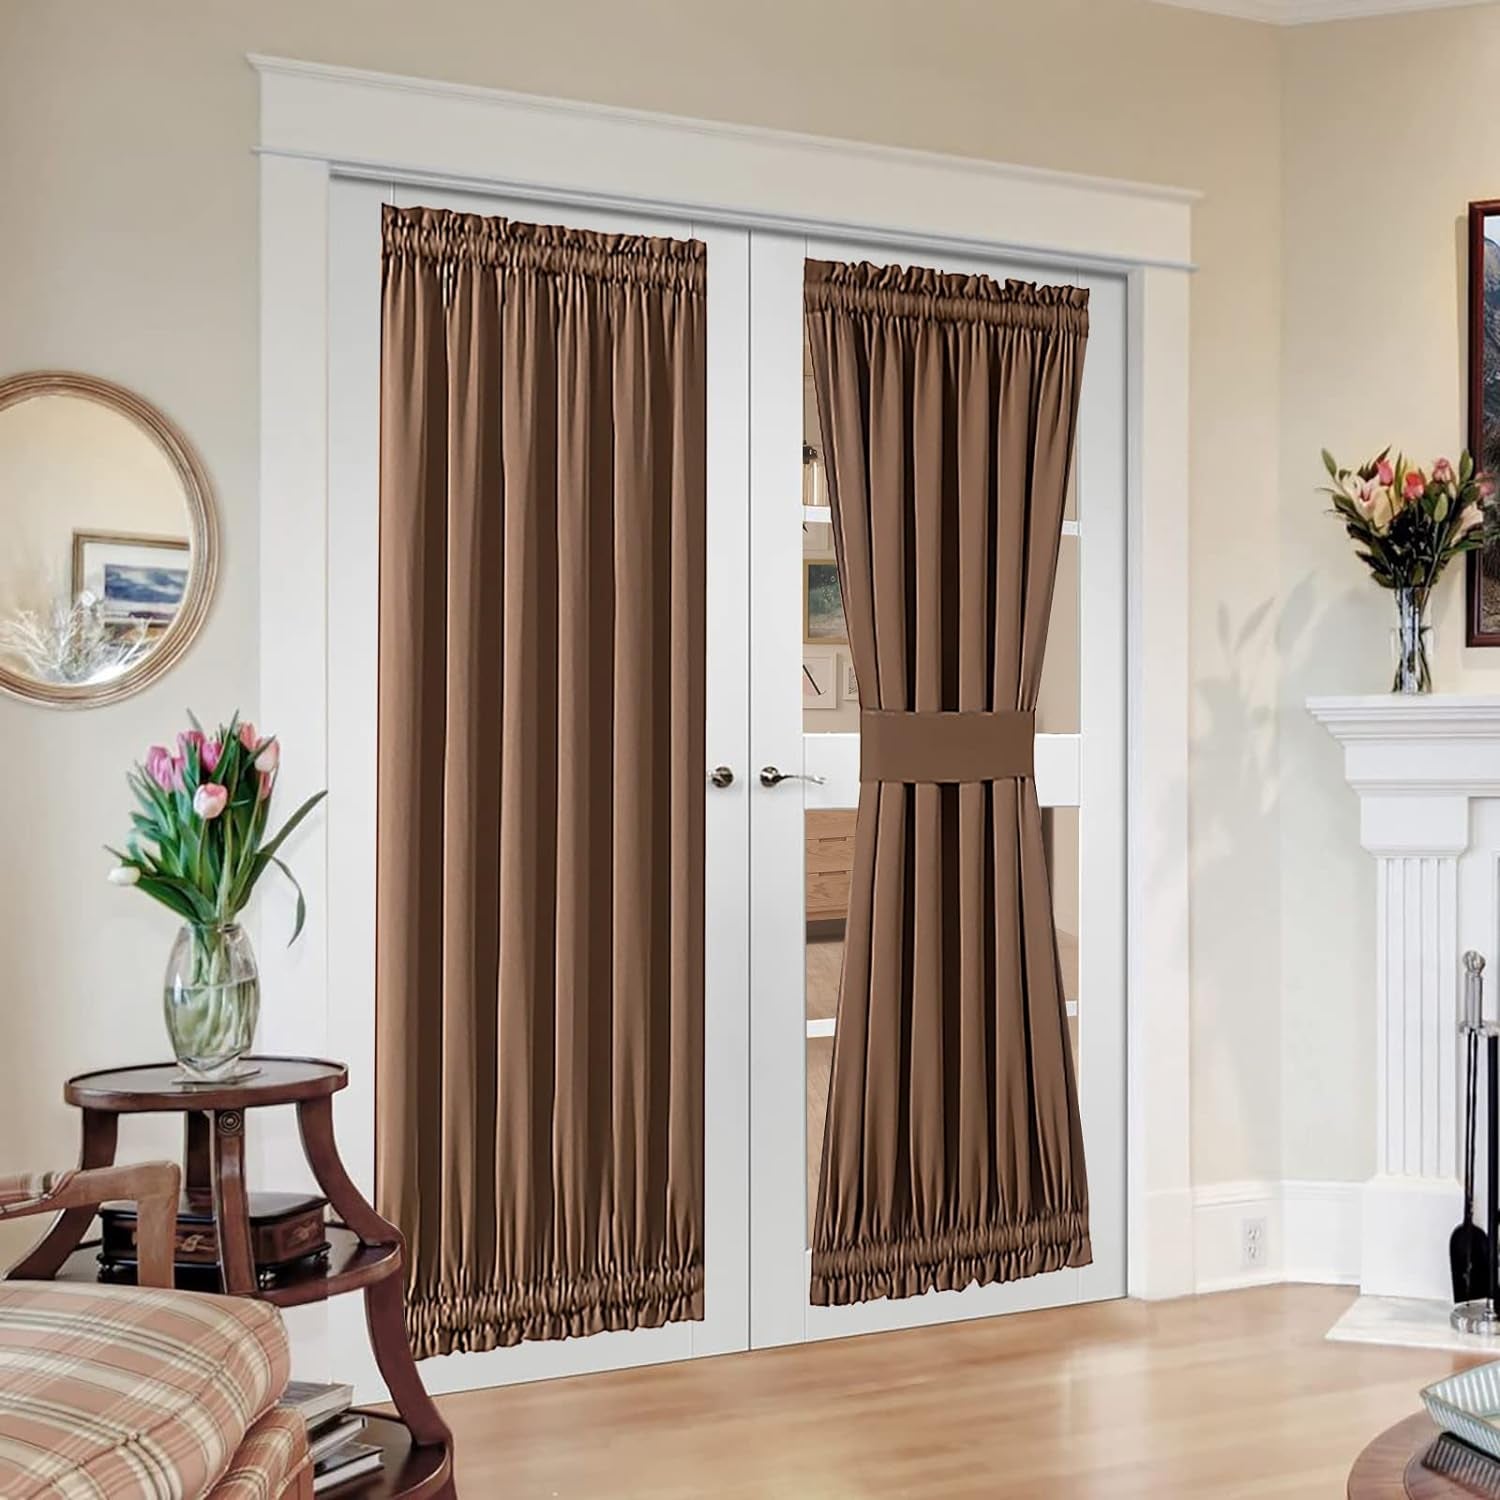 MIULEE Sidelight French Door Blackout Curtain Thermal Insulated Drapes Light Blocking Window Treatment Curtain for Narrow Glass Door Rod Pocket with Tieback 25 Inch by 72 Inch Black 1 Panel  MIULEE Cappuccino Brown 72.00" X 54.00" 